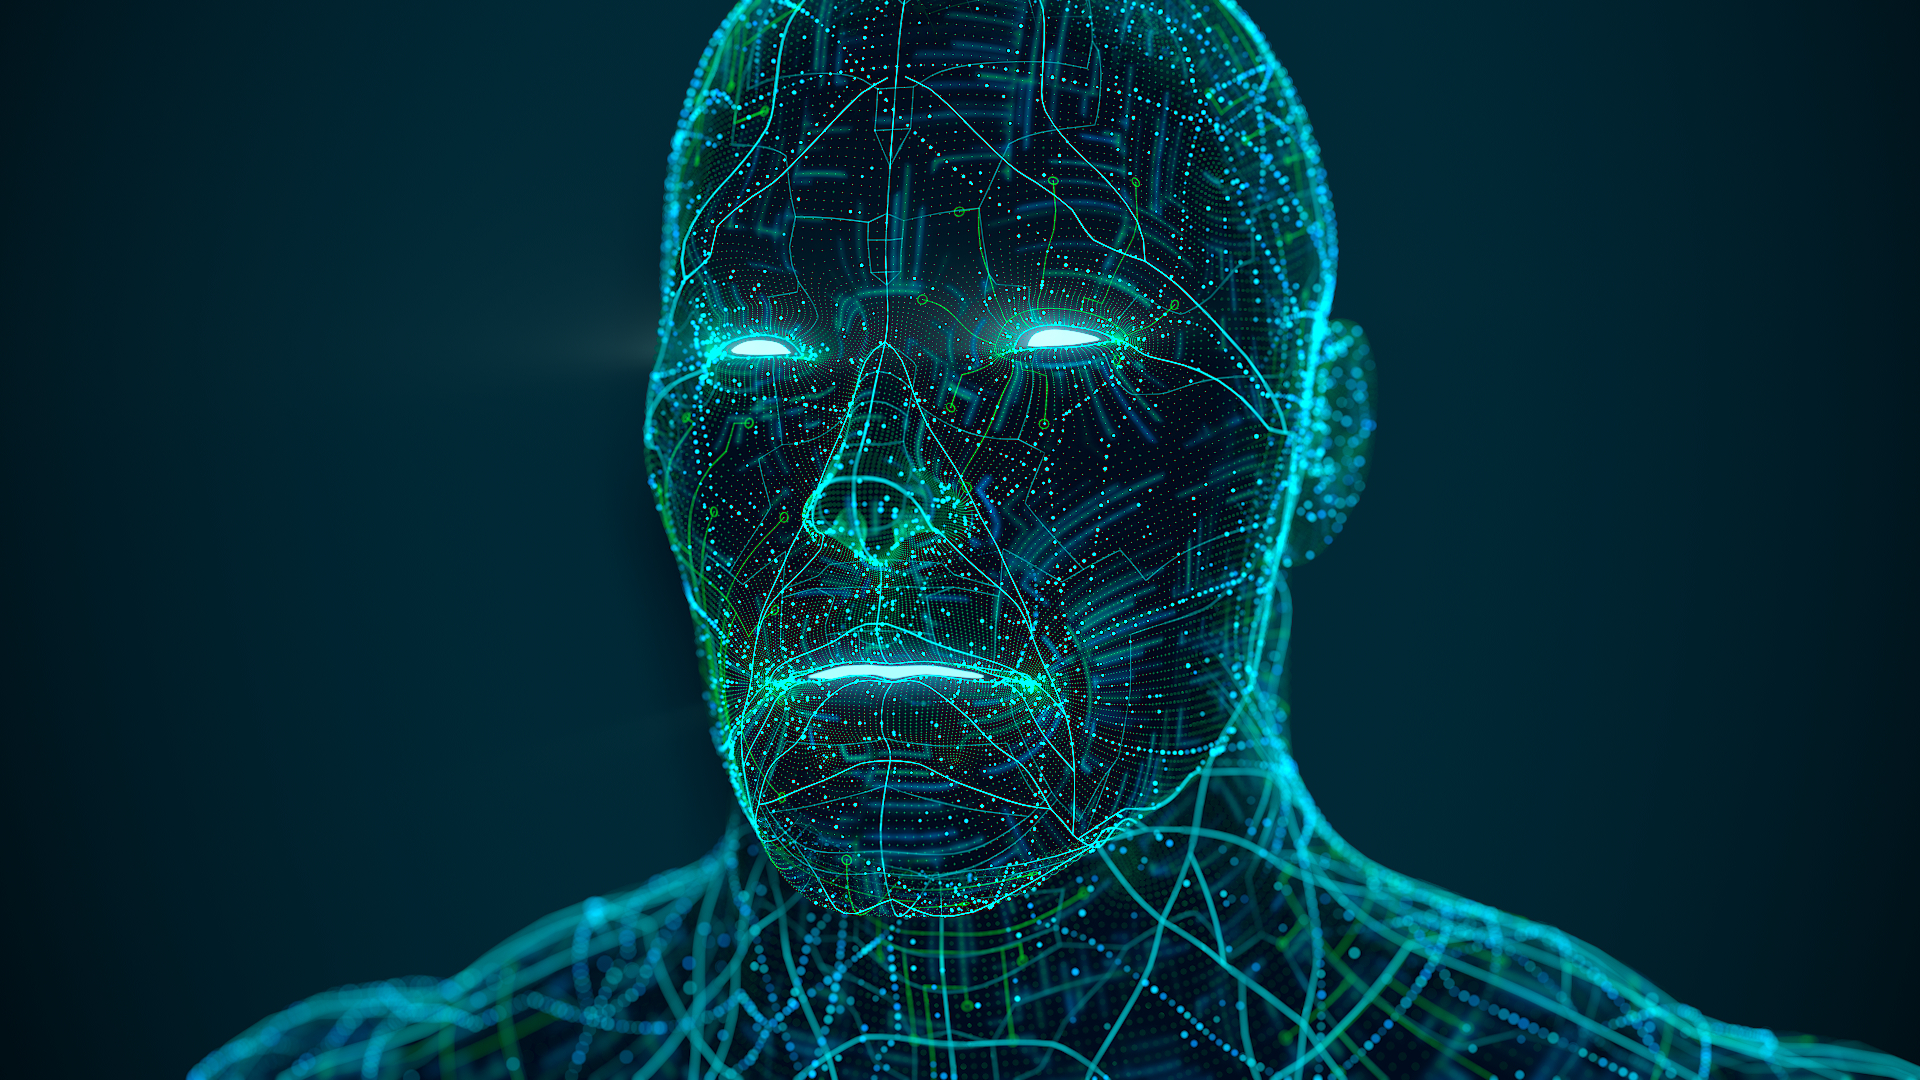 Dots Face Lights Turquoise Teal Men 1920x1080